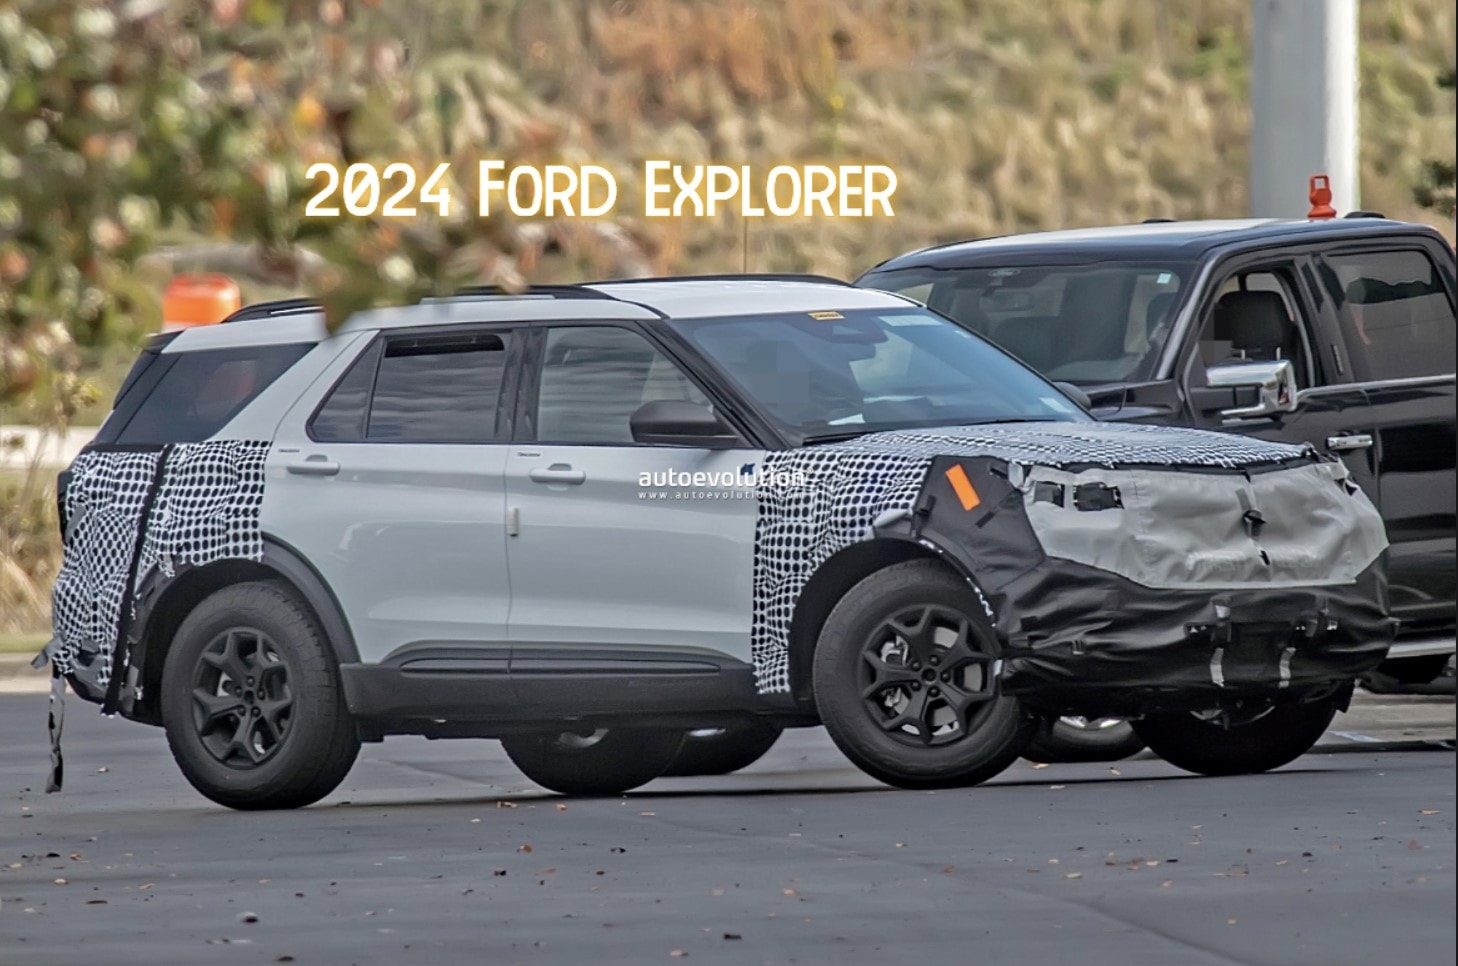 2024 Ford Explorer Shows New Infotainment and Instrument Cluster in